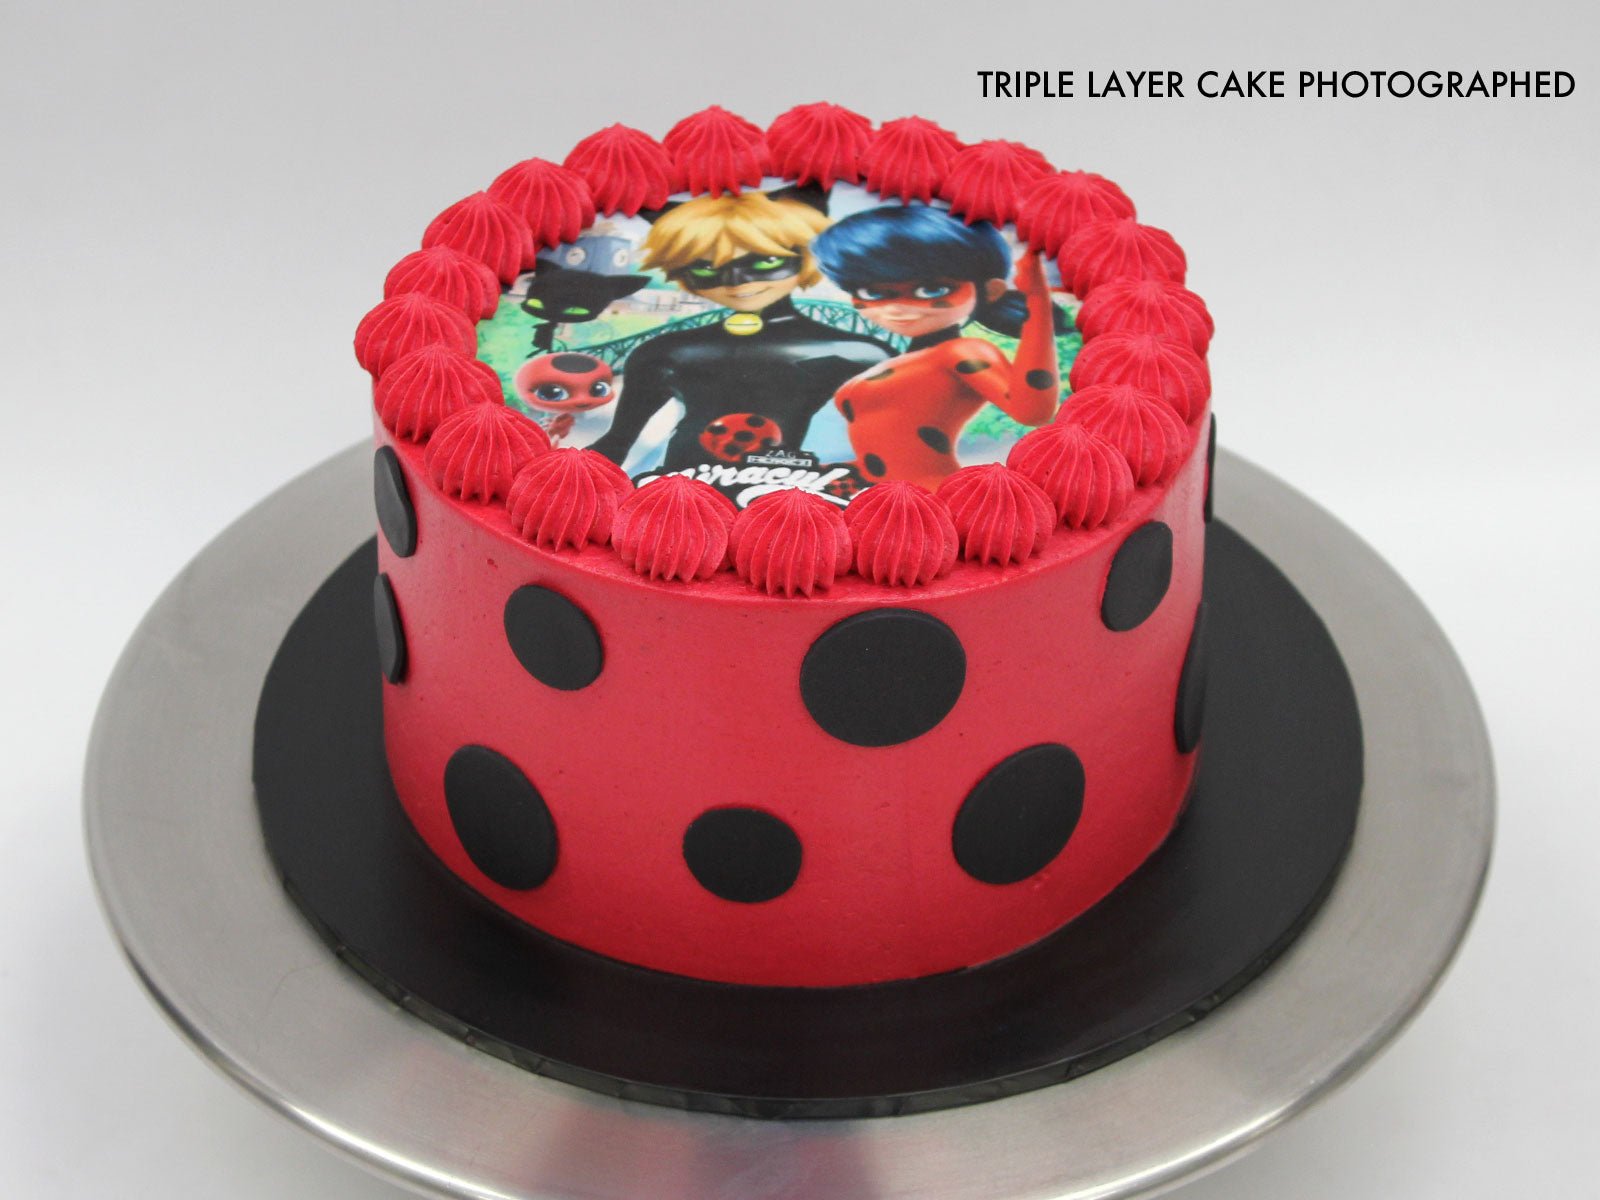 Butterfly Cake and Ladybug Cupcakes - All Done Monkey